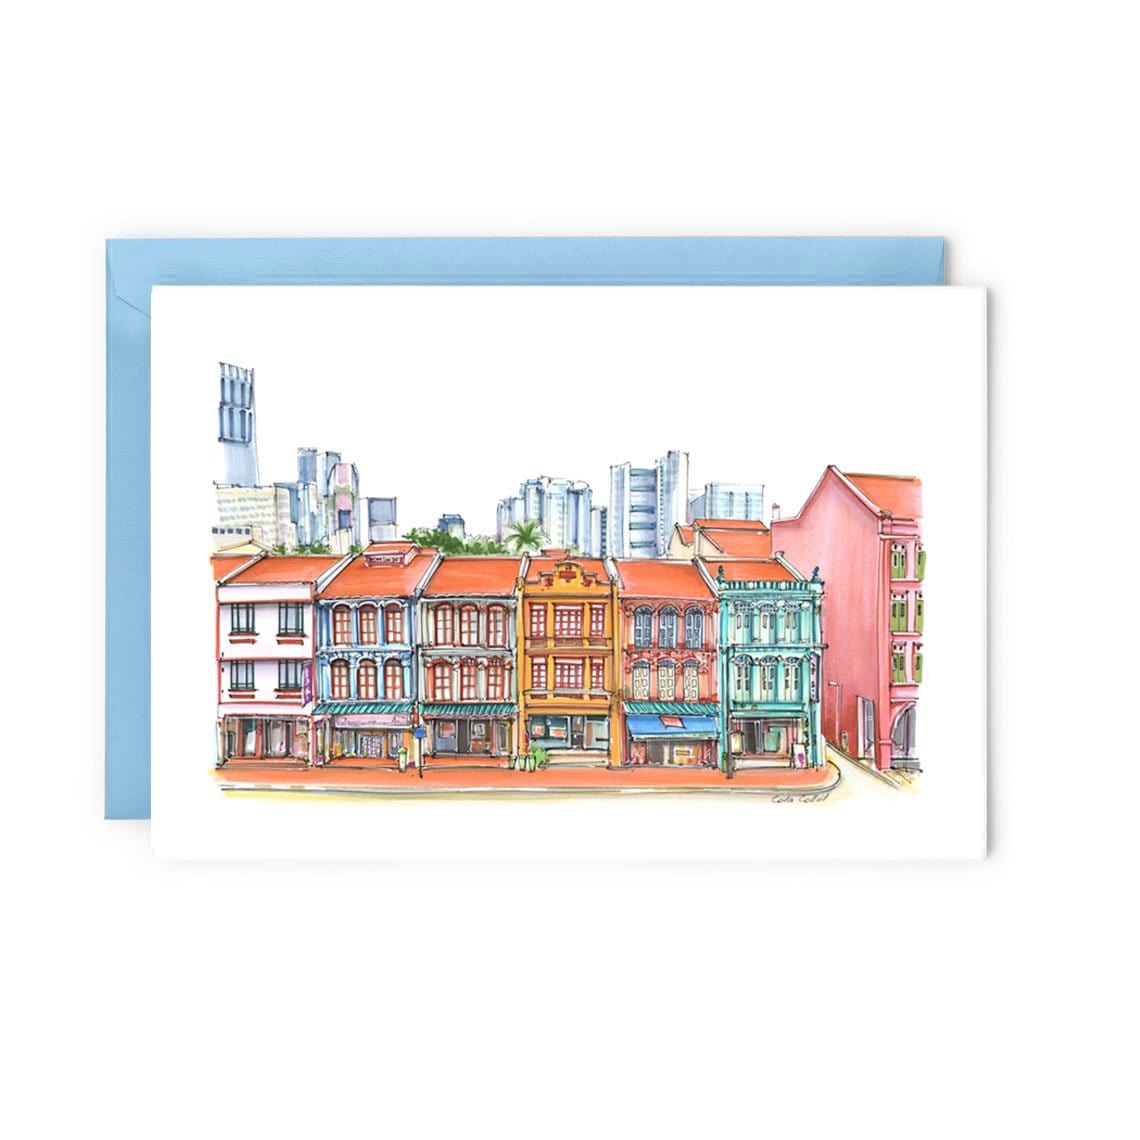 Row of Colourful Shophouses - Upper Cross Street Chinatown Greeting Card